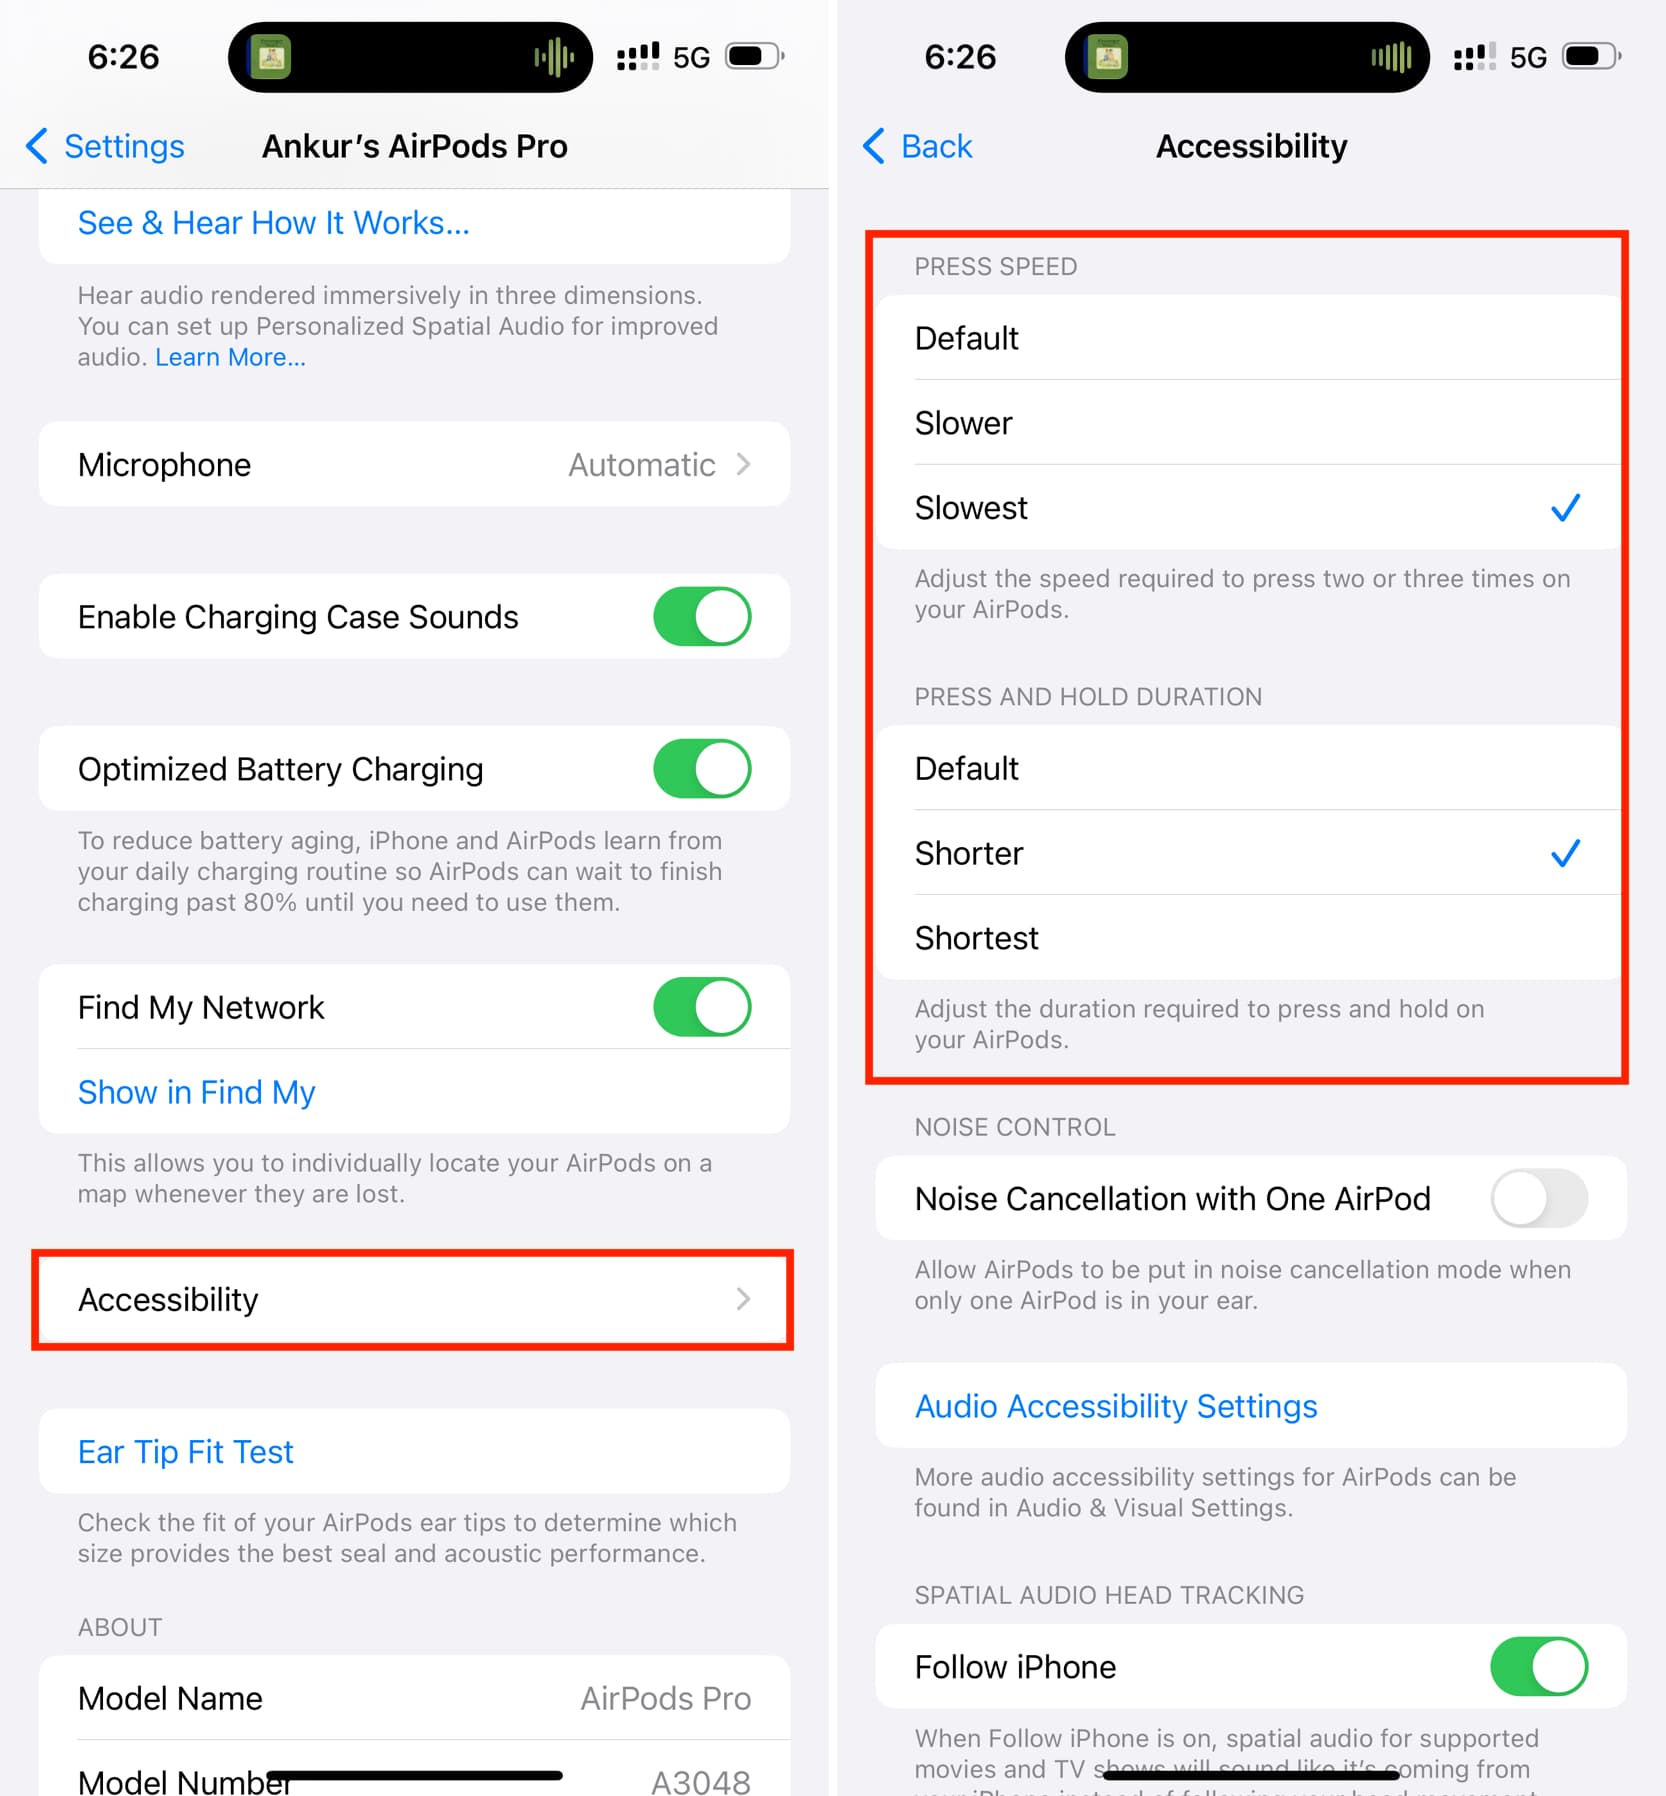 AirPods Pro Accessibility settings for press speed